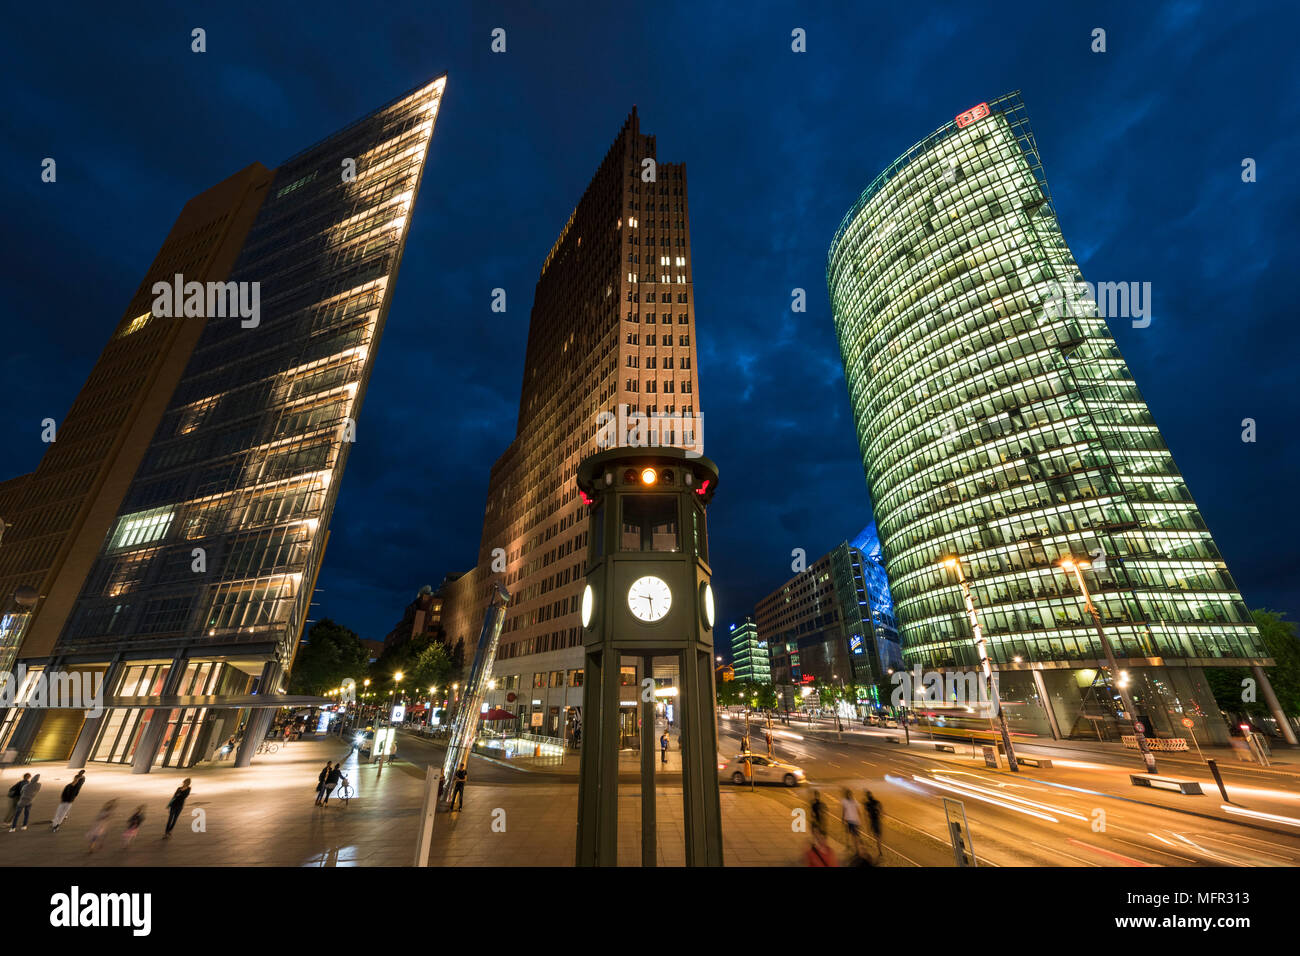 Berlin. Germany. Potsdamer Platz, night view of skyscrapers and the replica historical traffic light tower / clock, designed by Jean Krämer, and made  Stock Photo